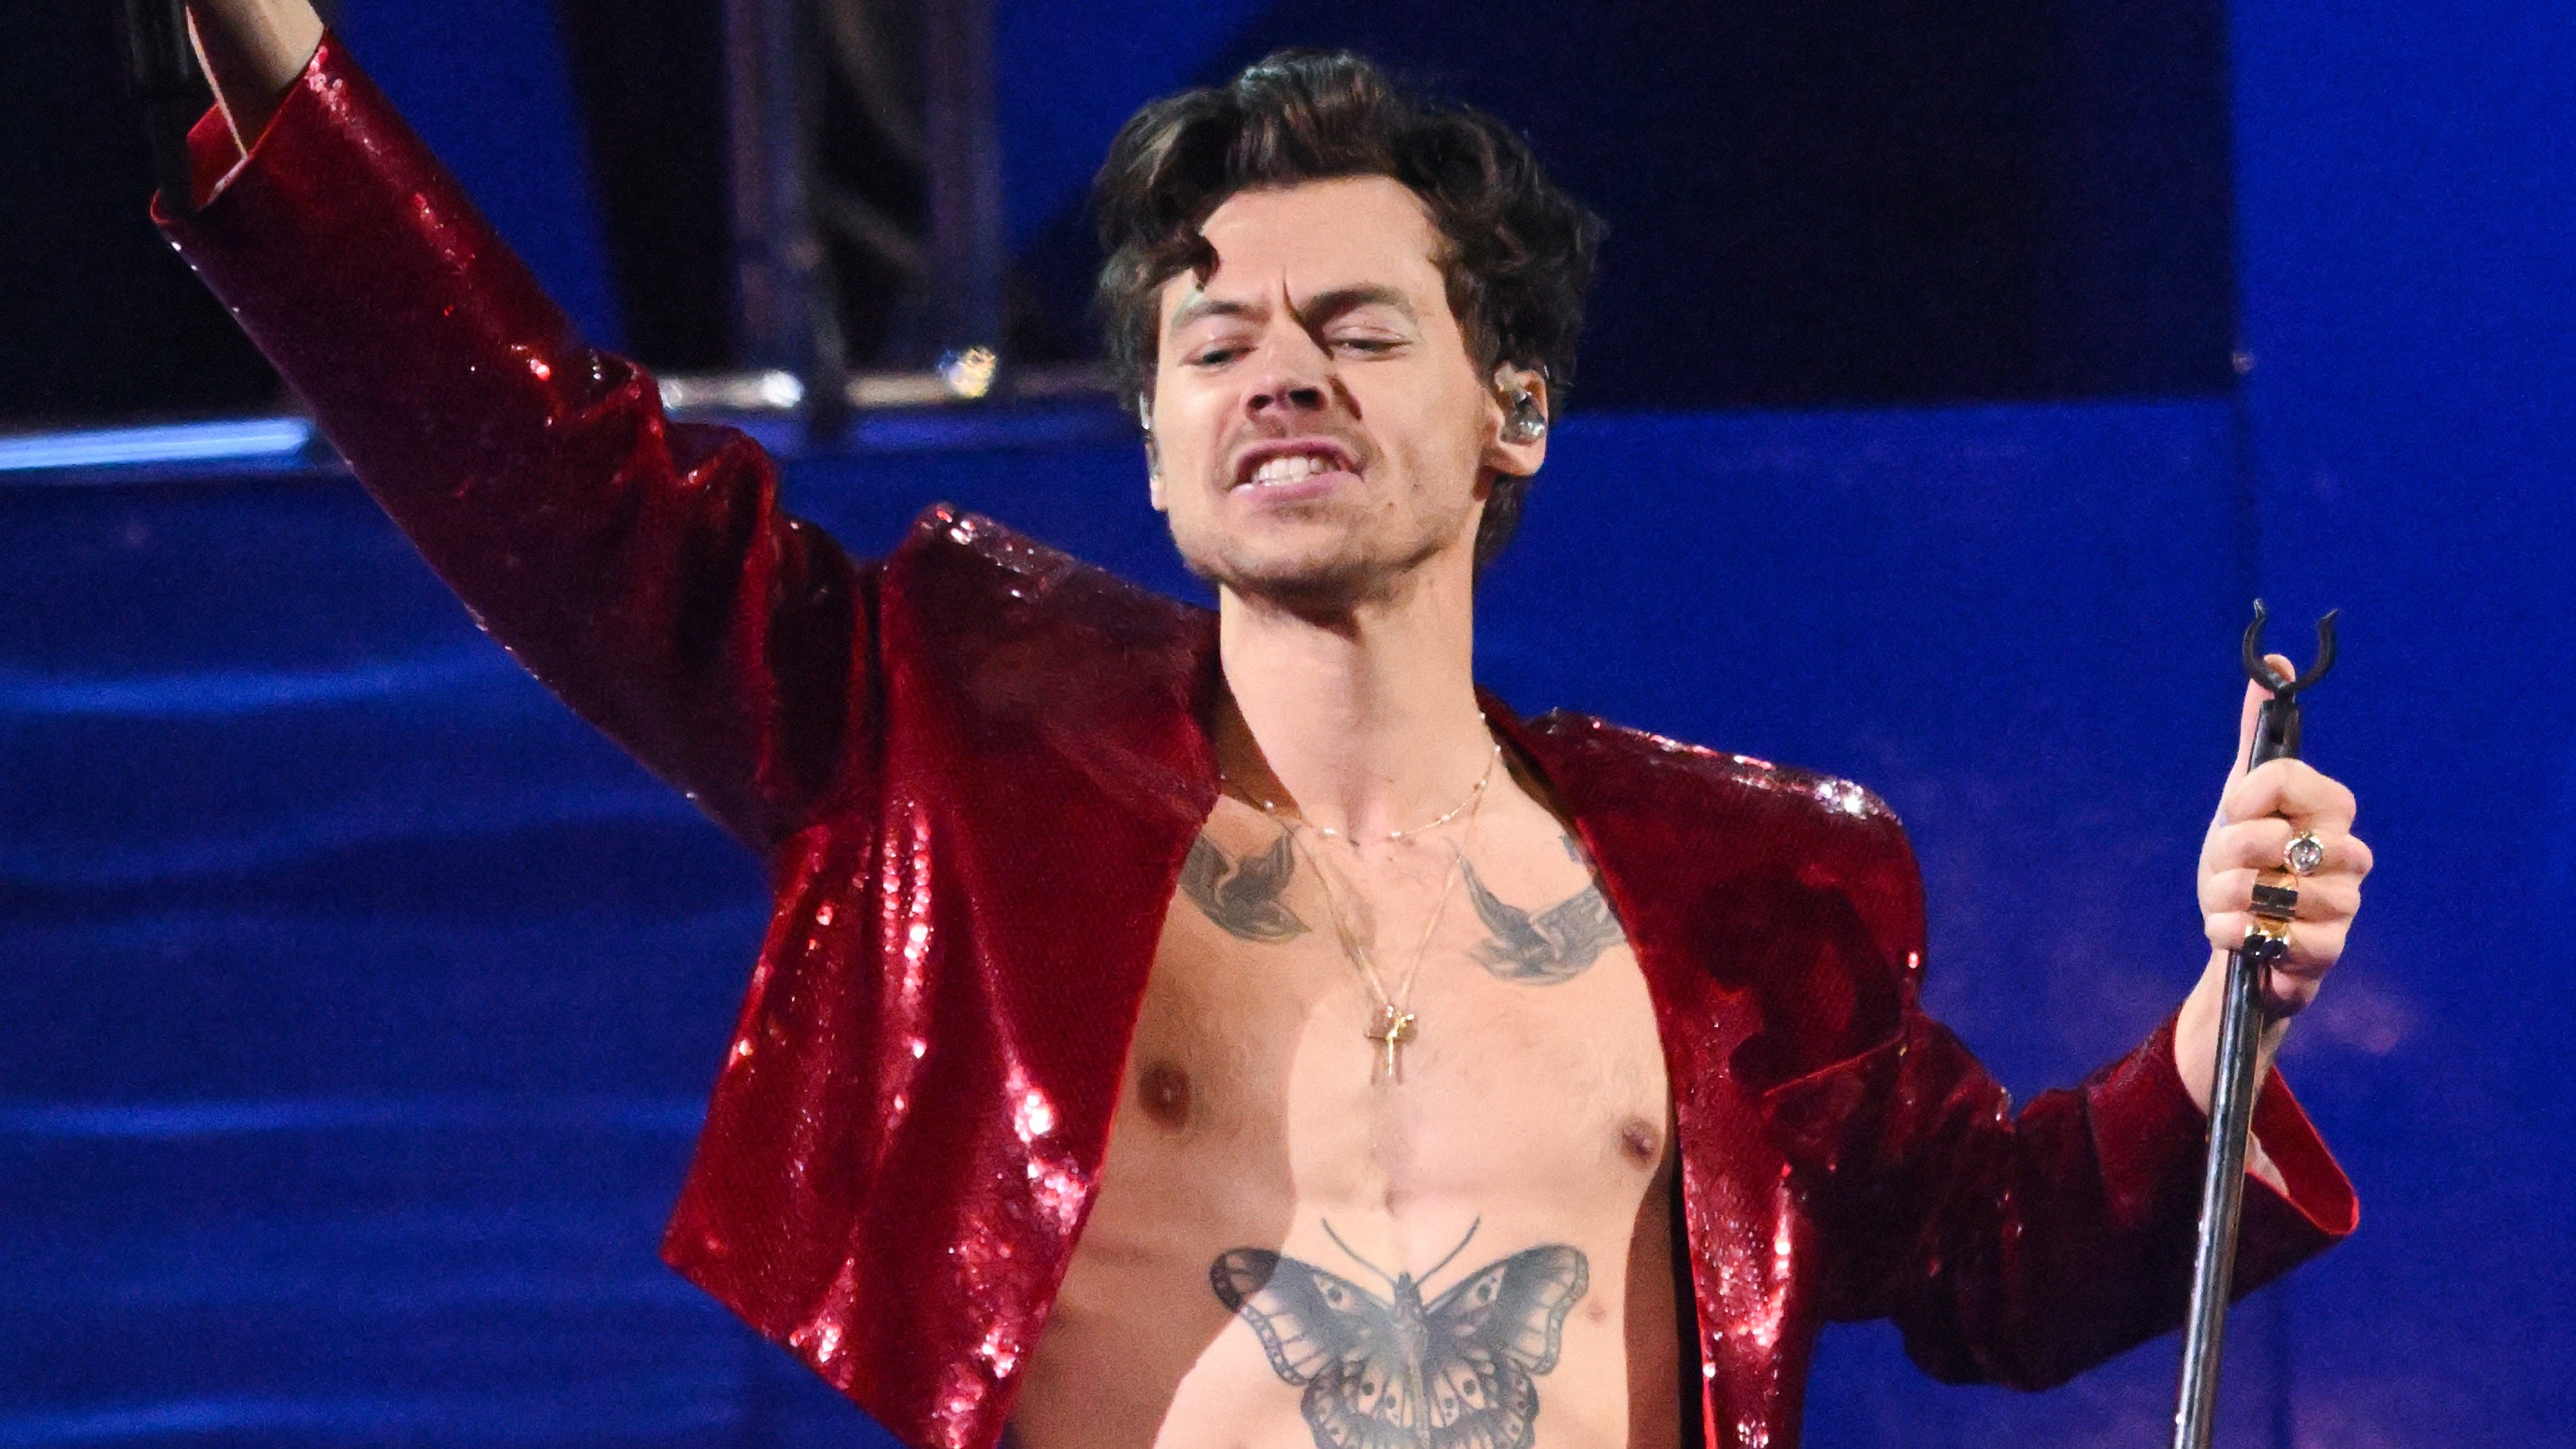 Harry Styles was hit by an unknown object while onstage in Vienna, following several similar incidents with other musical artists including Bebe Rexha, Kelsea Ballerini and Pink. (Karwai Tang/WireImage)